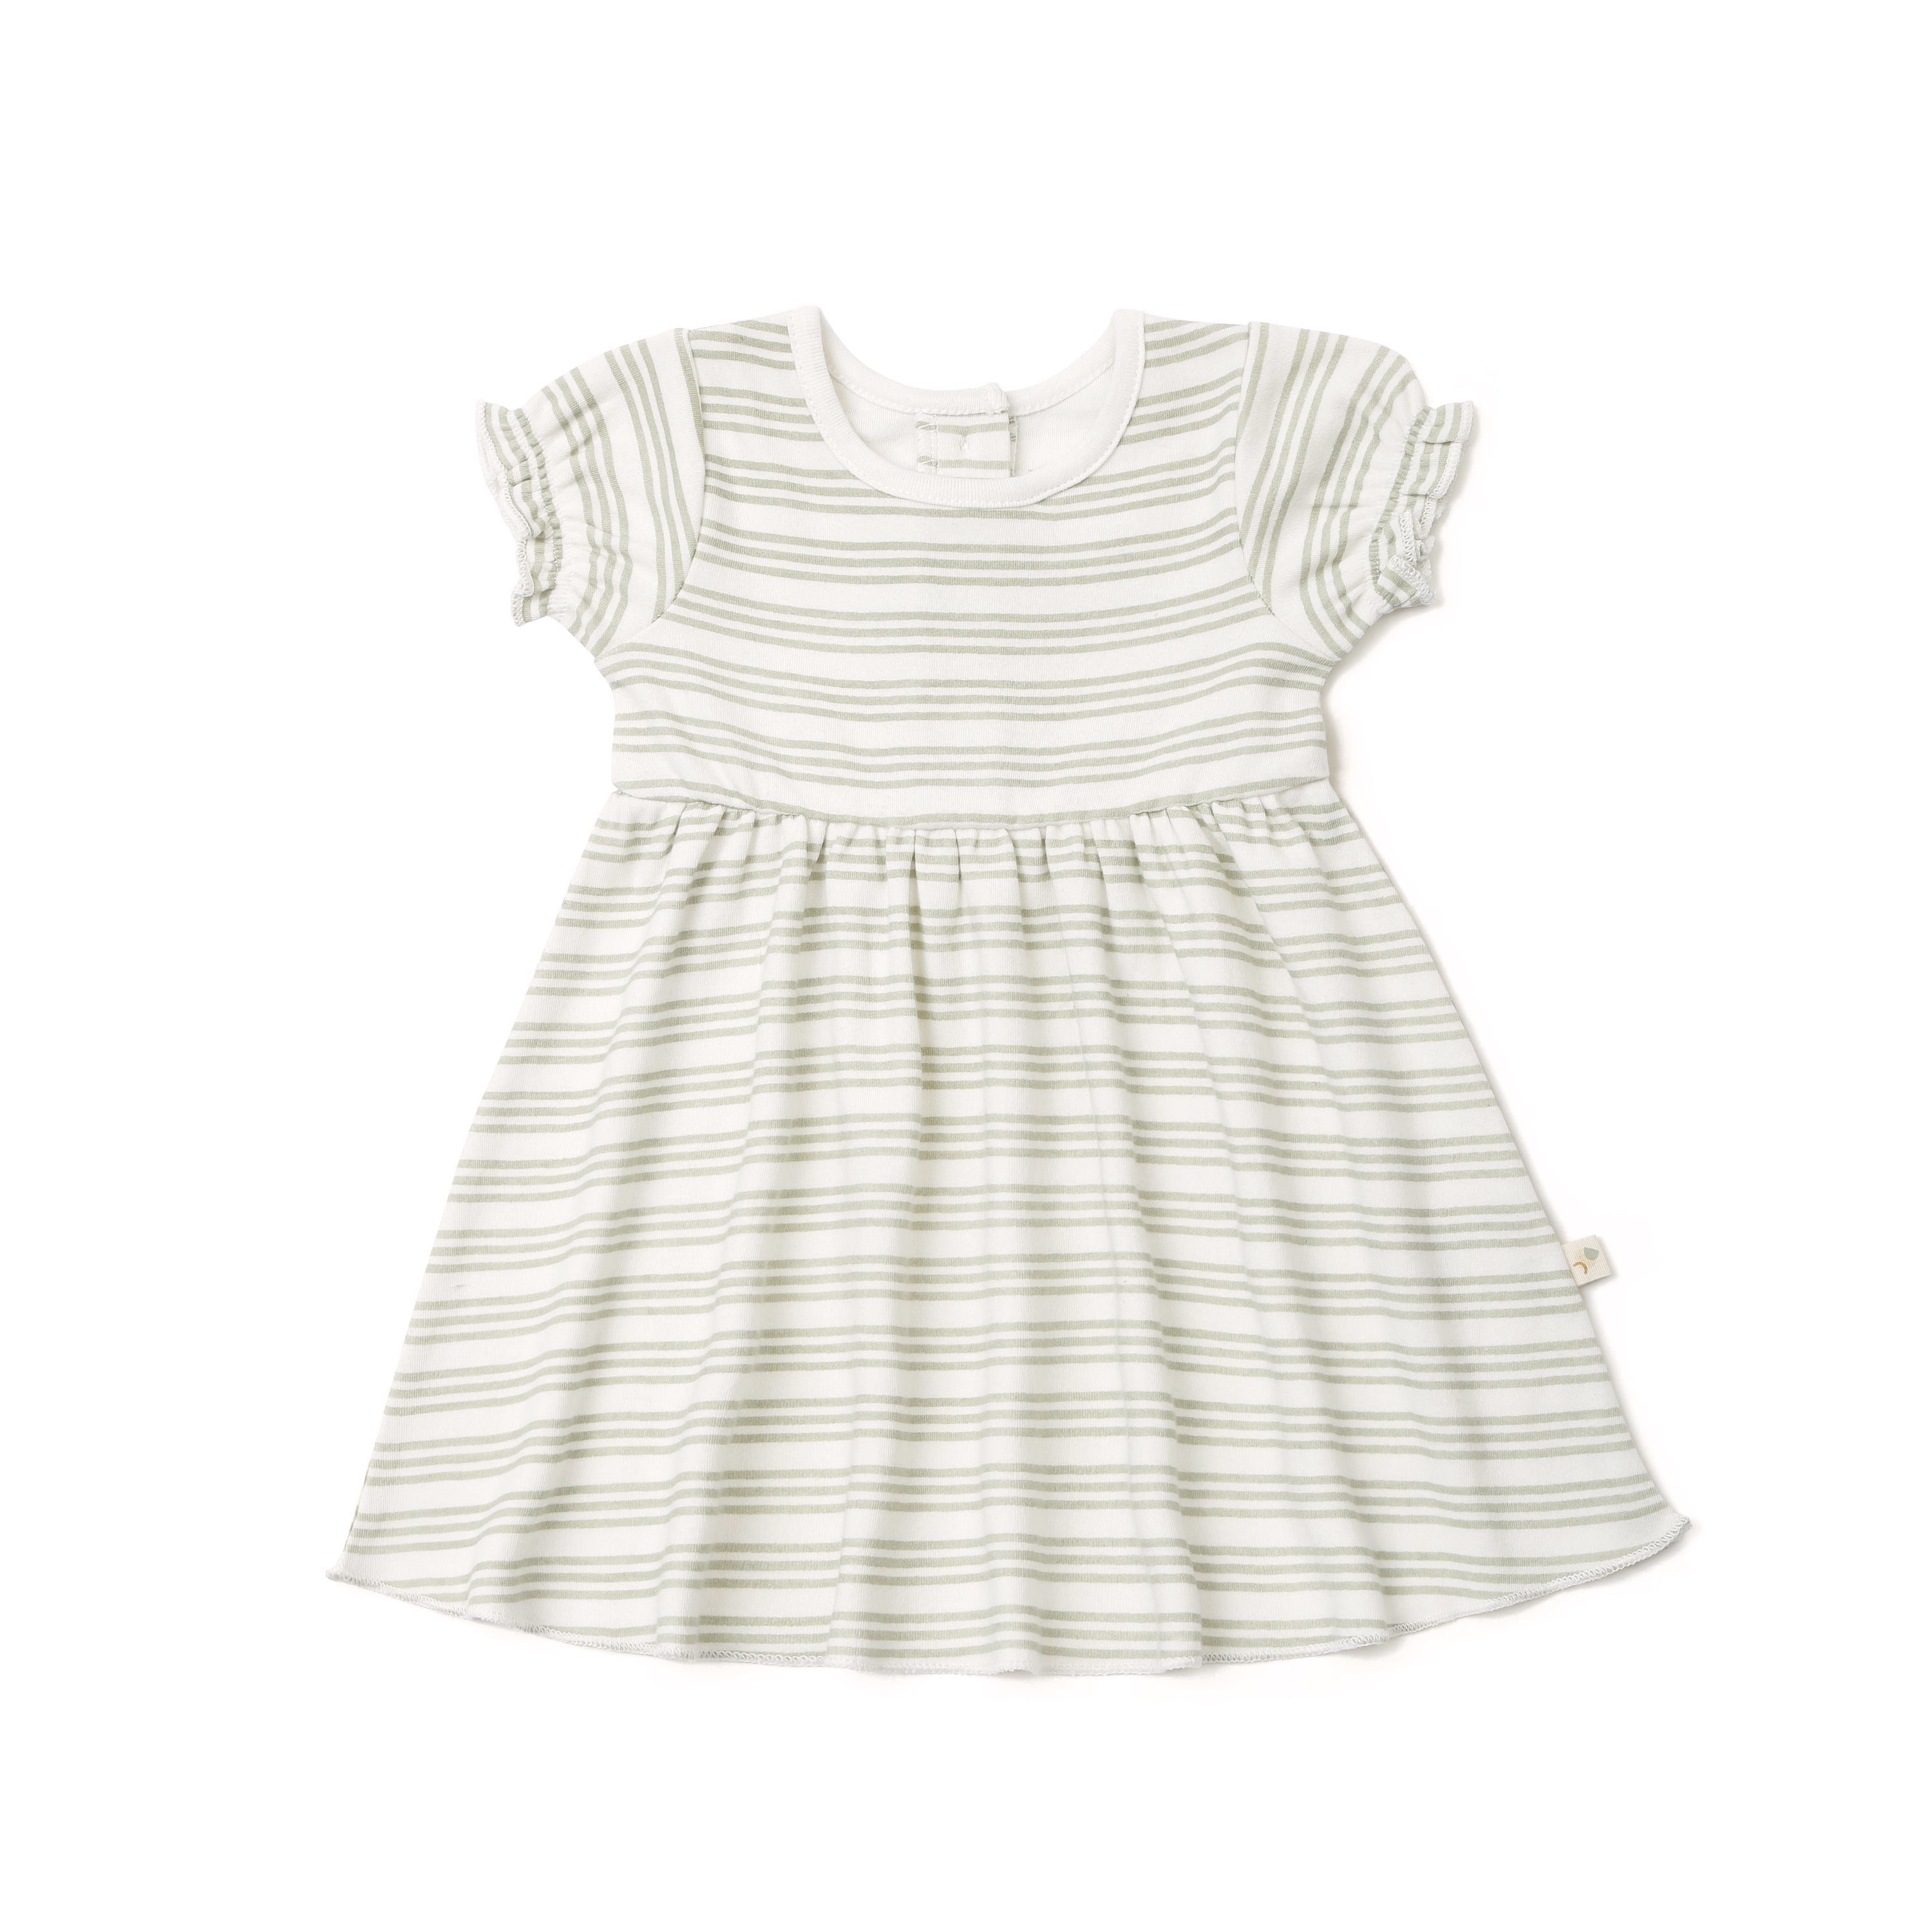 A green and white striped toddler's dress from Organic Kids with short, ruffled sleeves and a gathered skirt, displayed against a white background.